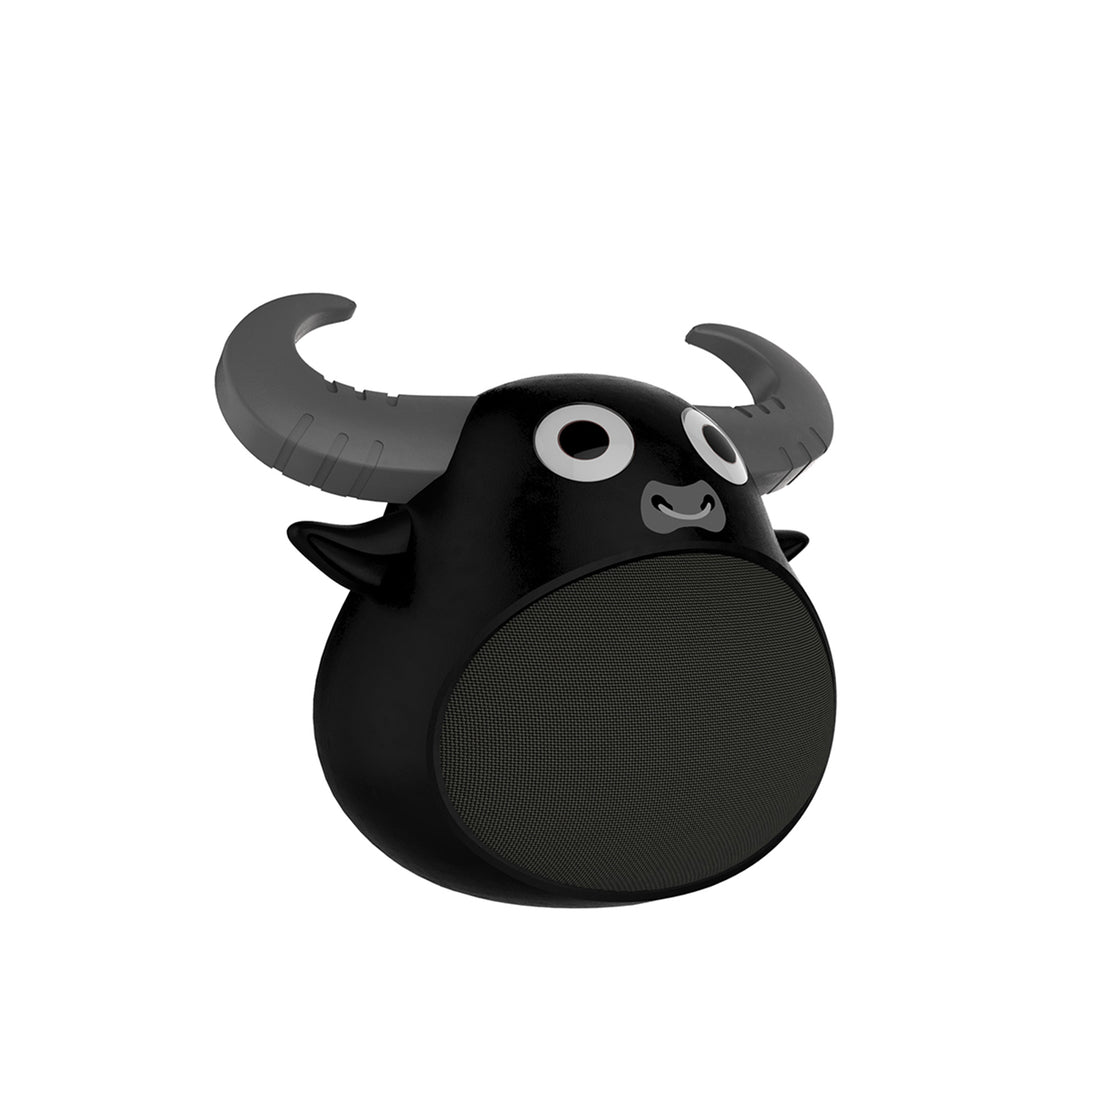 Fitsmart Bluetooth Animal Face Speaker Portable Wireless Stereo Sound-Home Audio-PEROZ Accessories